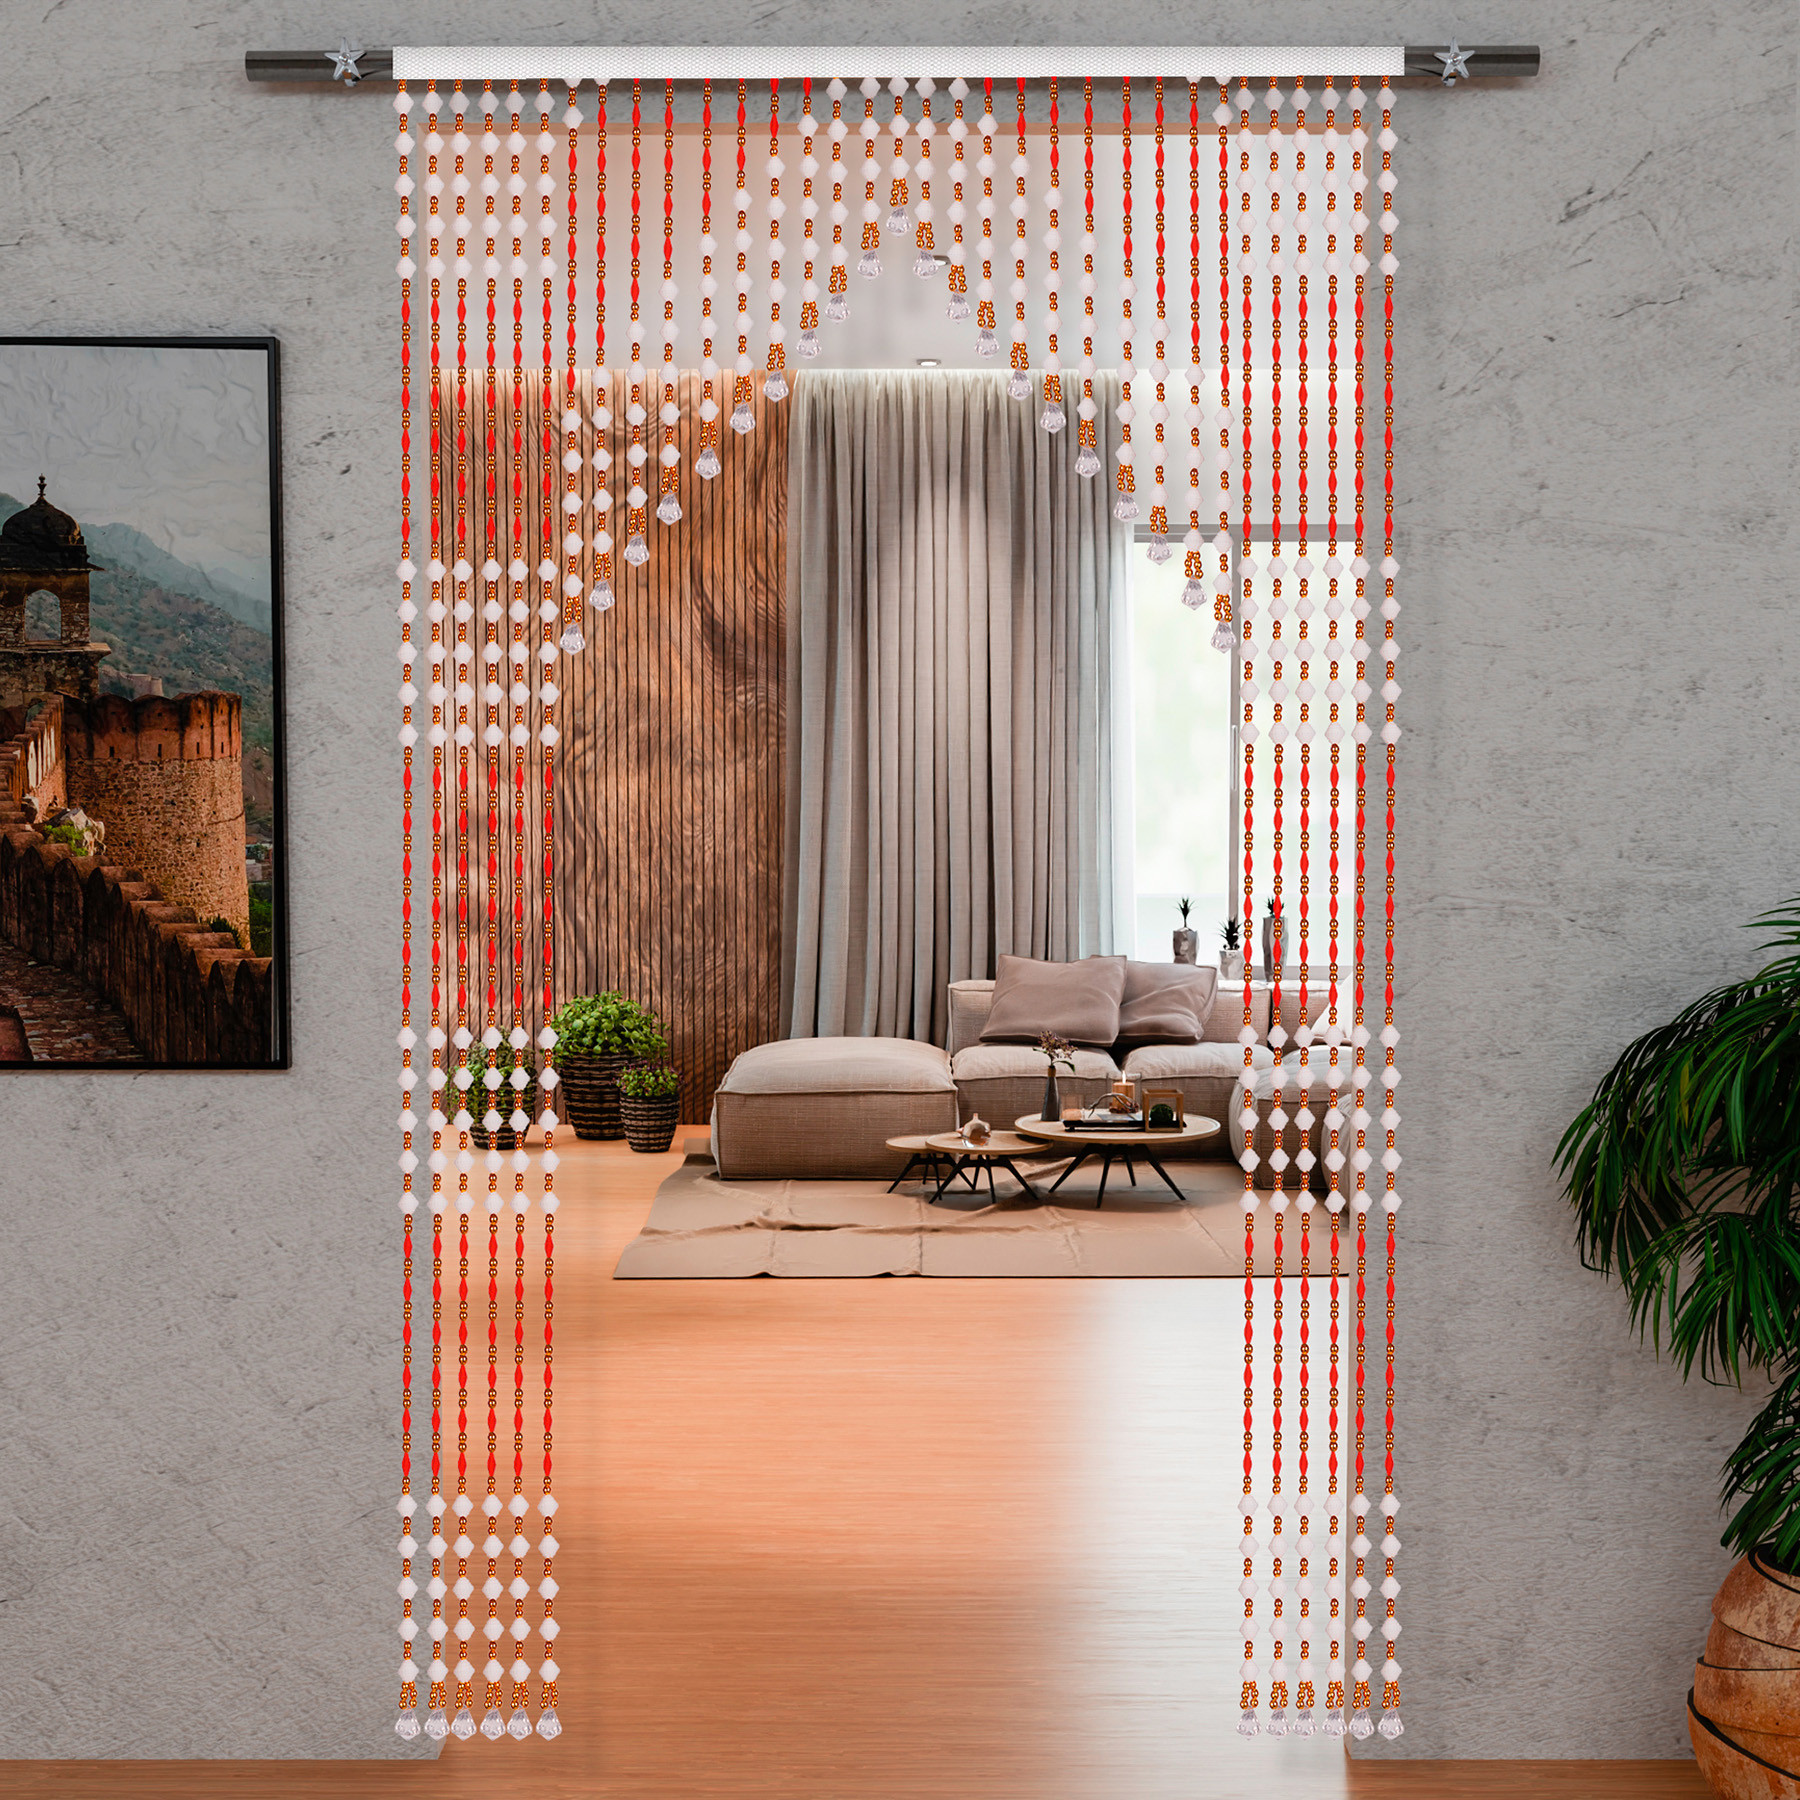 Kuber Industries String Curtain | Fancy Sparkling Door Curtains for Home Décor | Pooja Room String Curtains | String Beads Sheer Curtains | Angura Temple Curtain | 4x7 Feet | White & Red